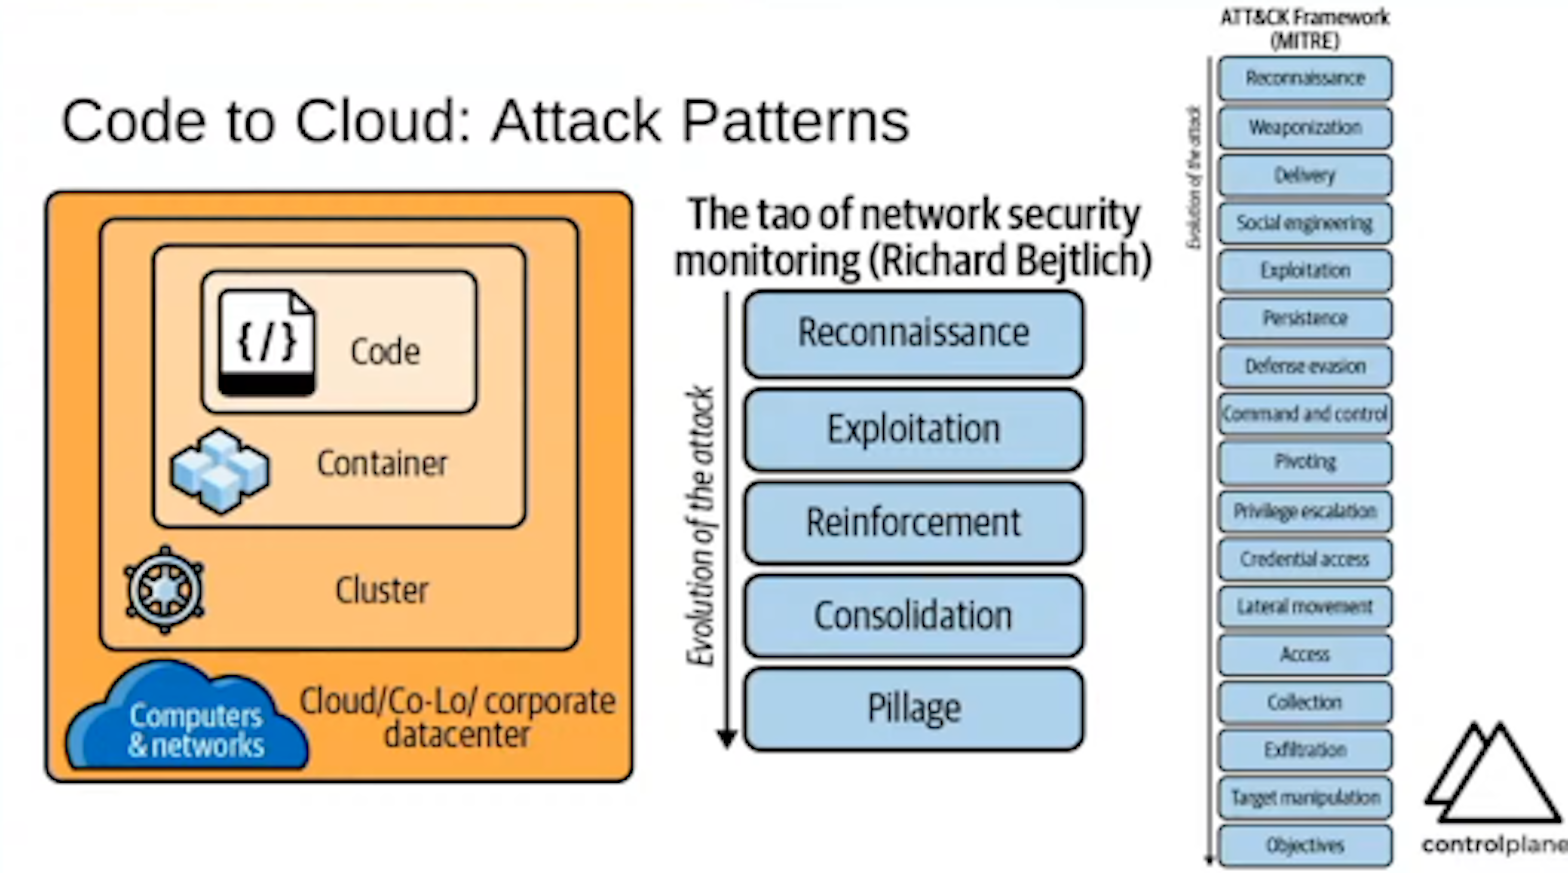 Code to cloud attack patterns